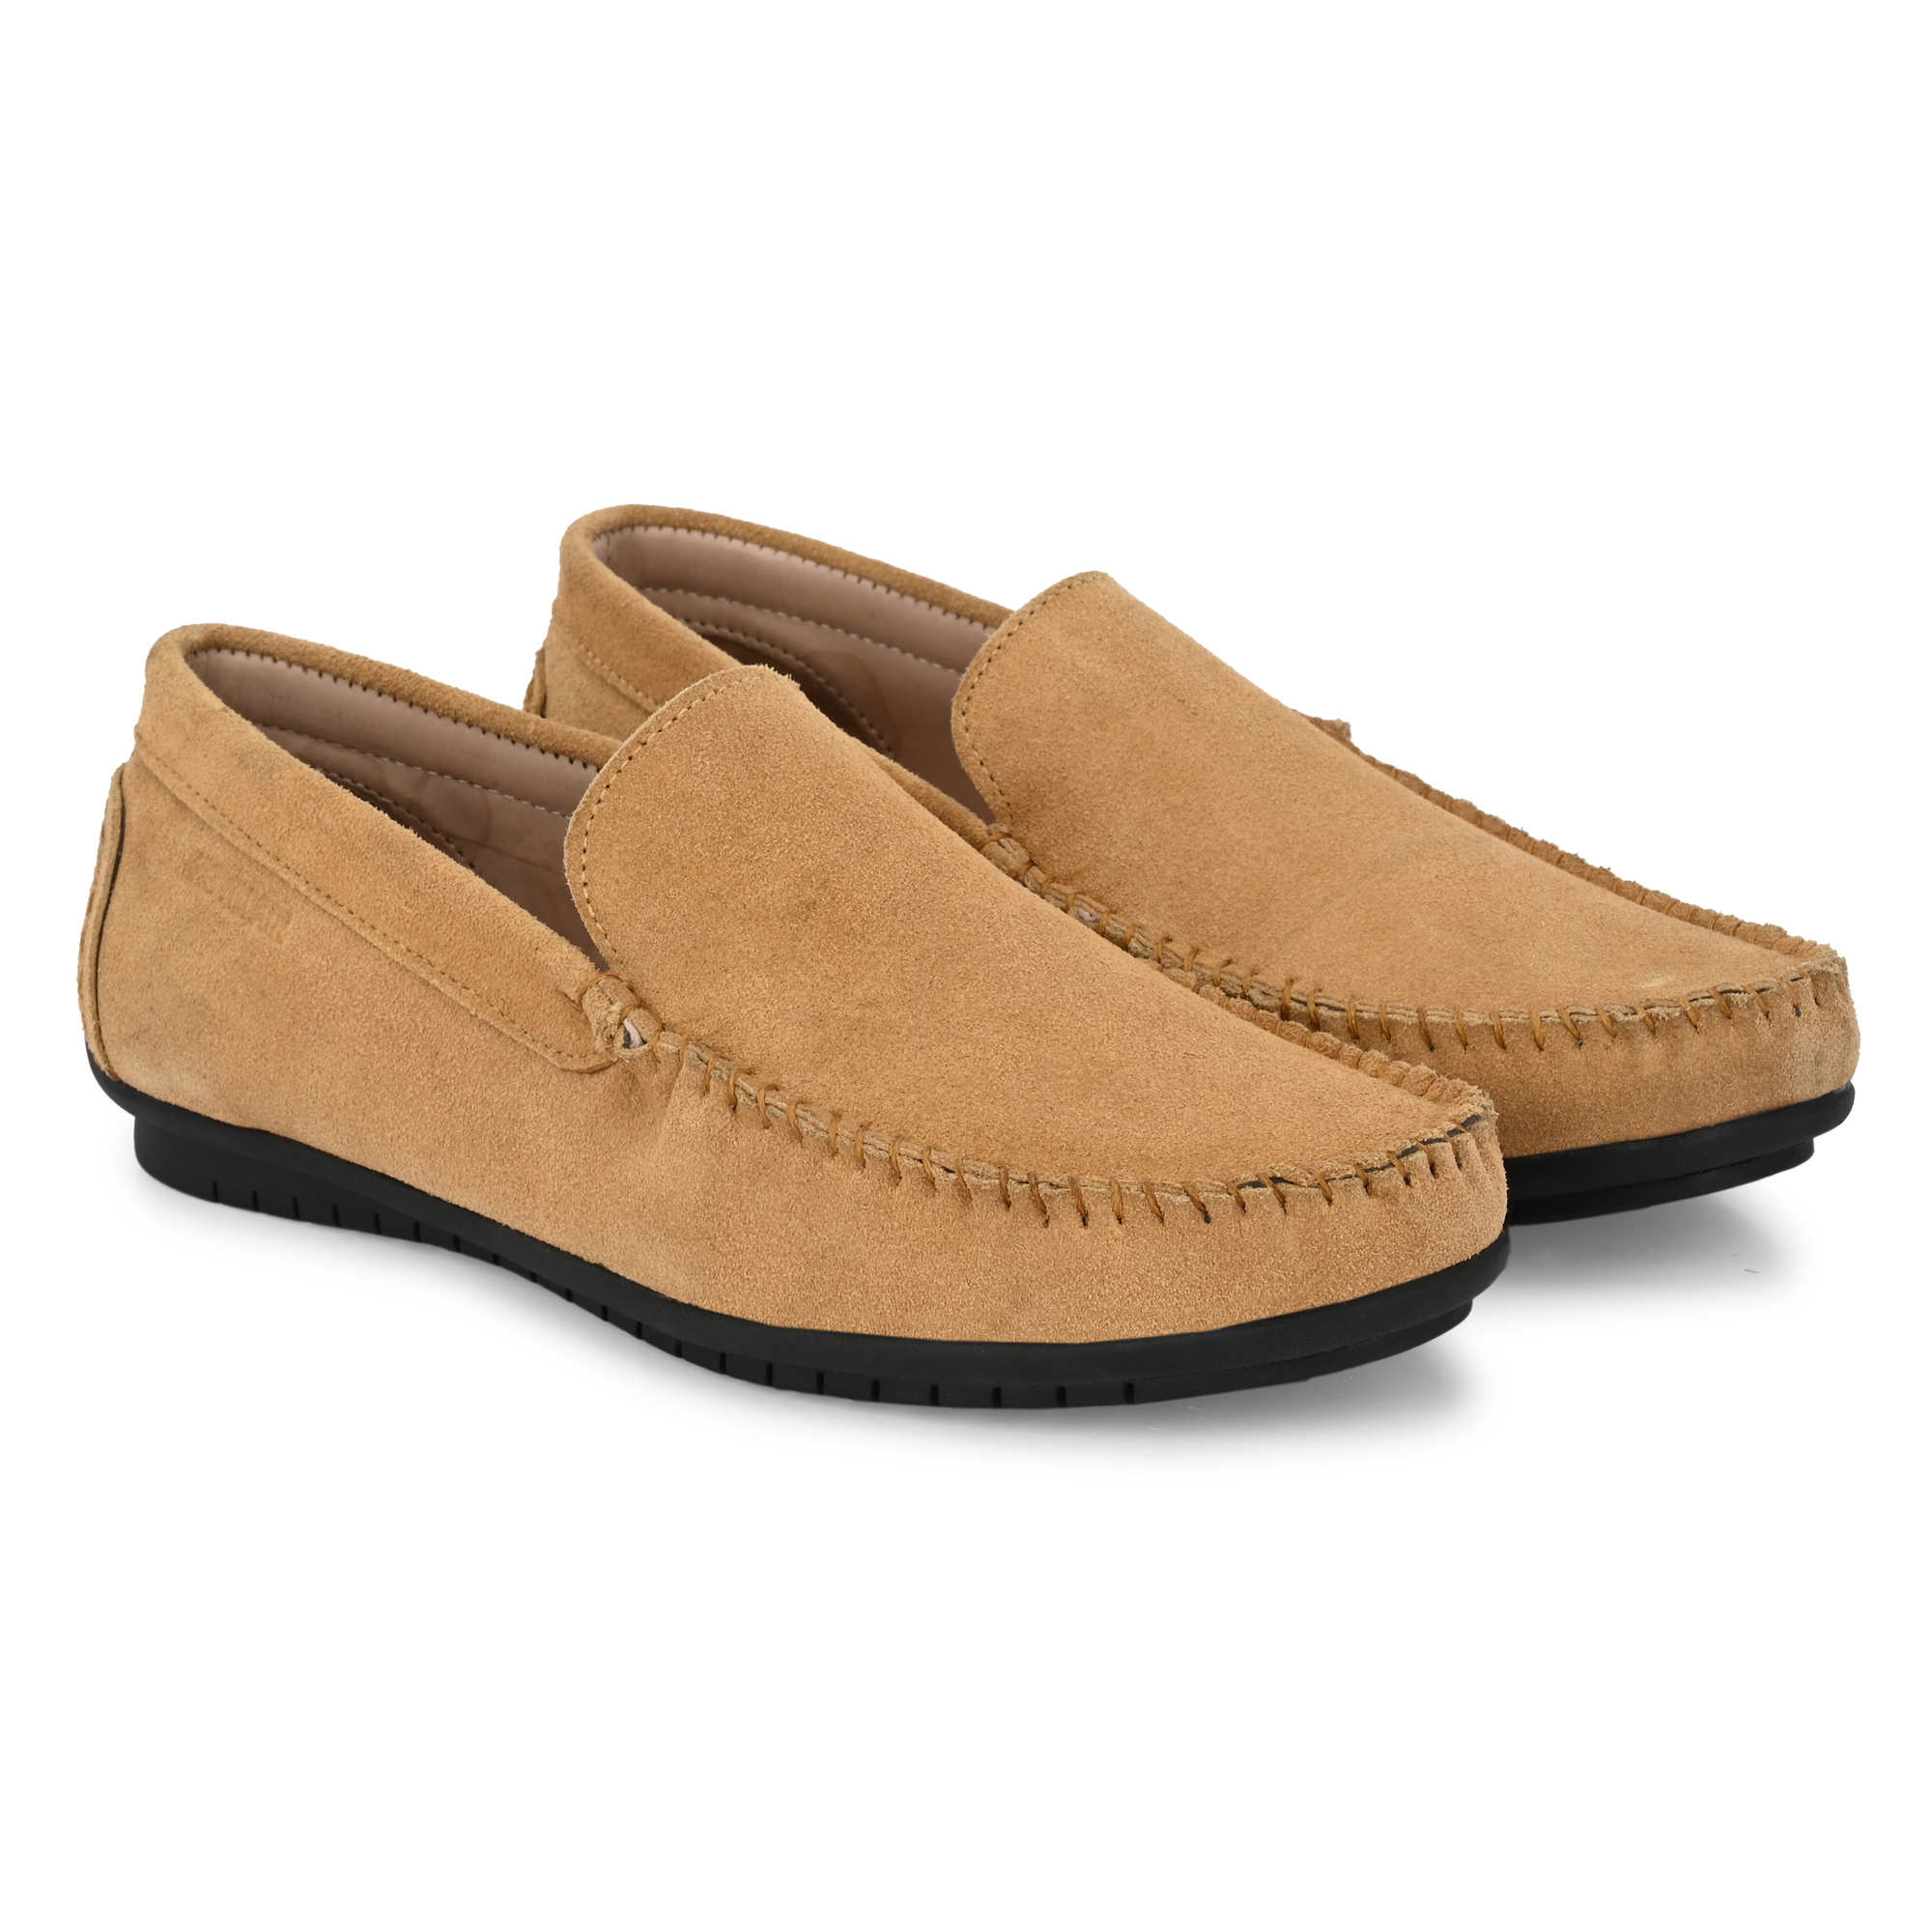 Tan Color Loafers | Buy leather loafers Loafers shoes - Movin Air